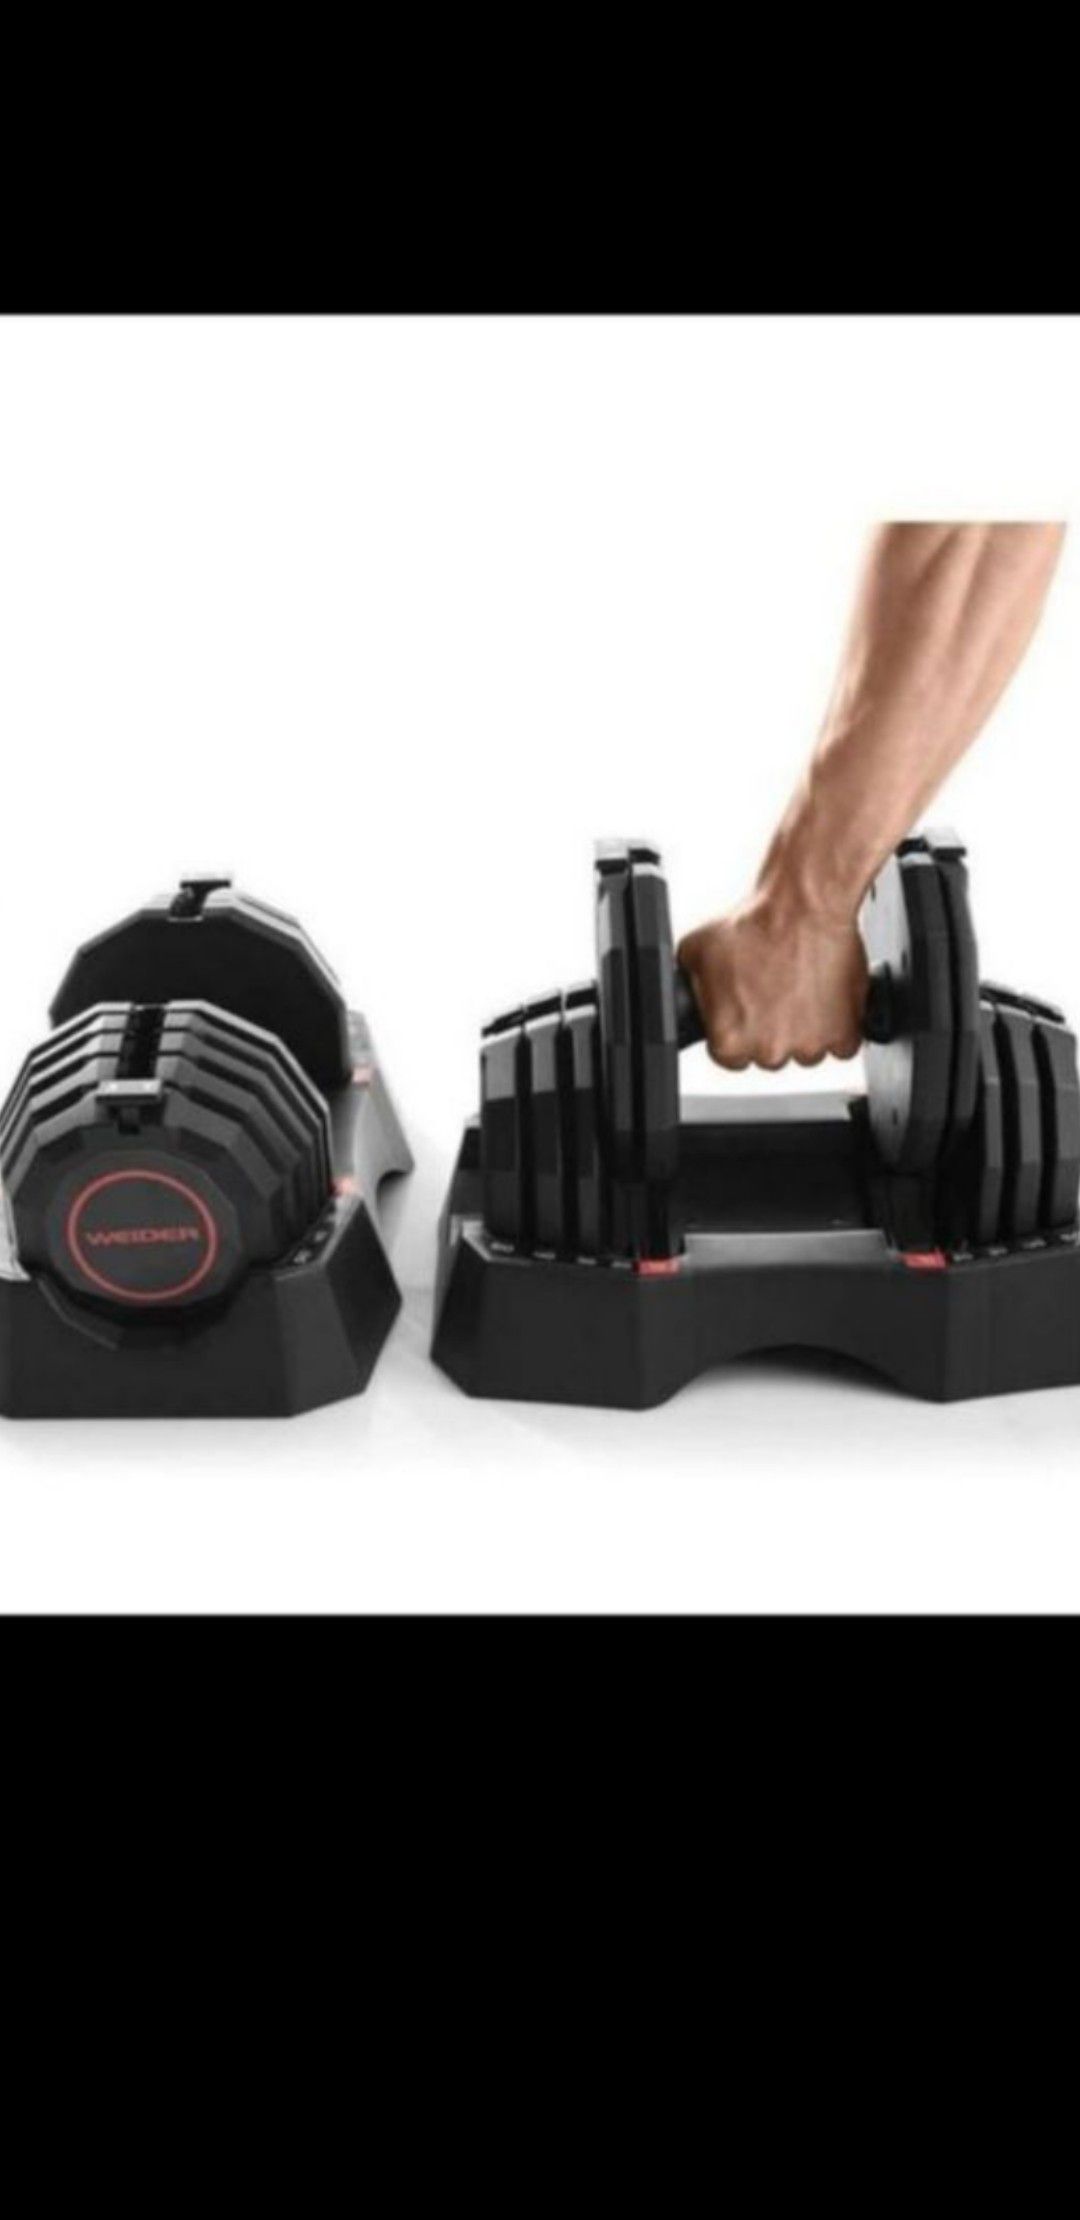 💪💪BRAND NEW, IN BOX-Weider Select A-Weight Adjustable 100LB Dumbbells set💪